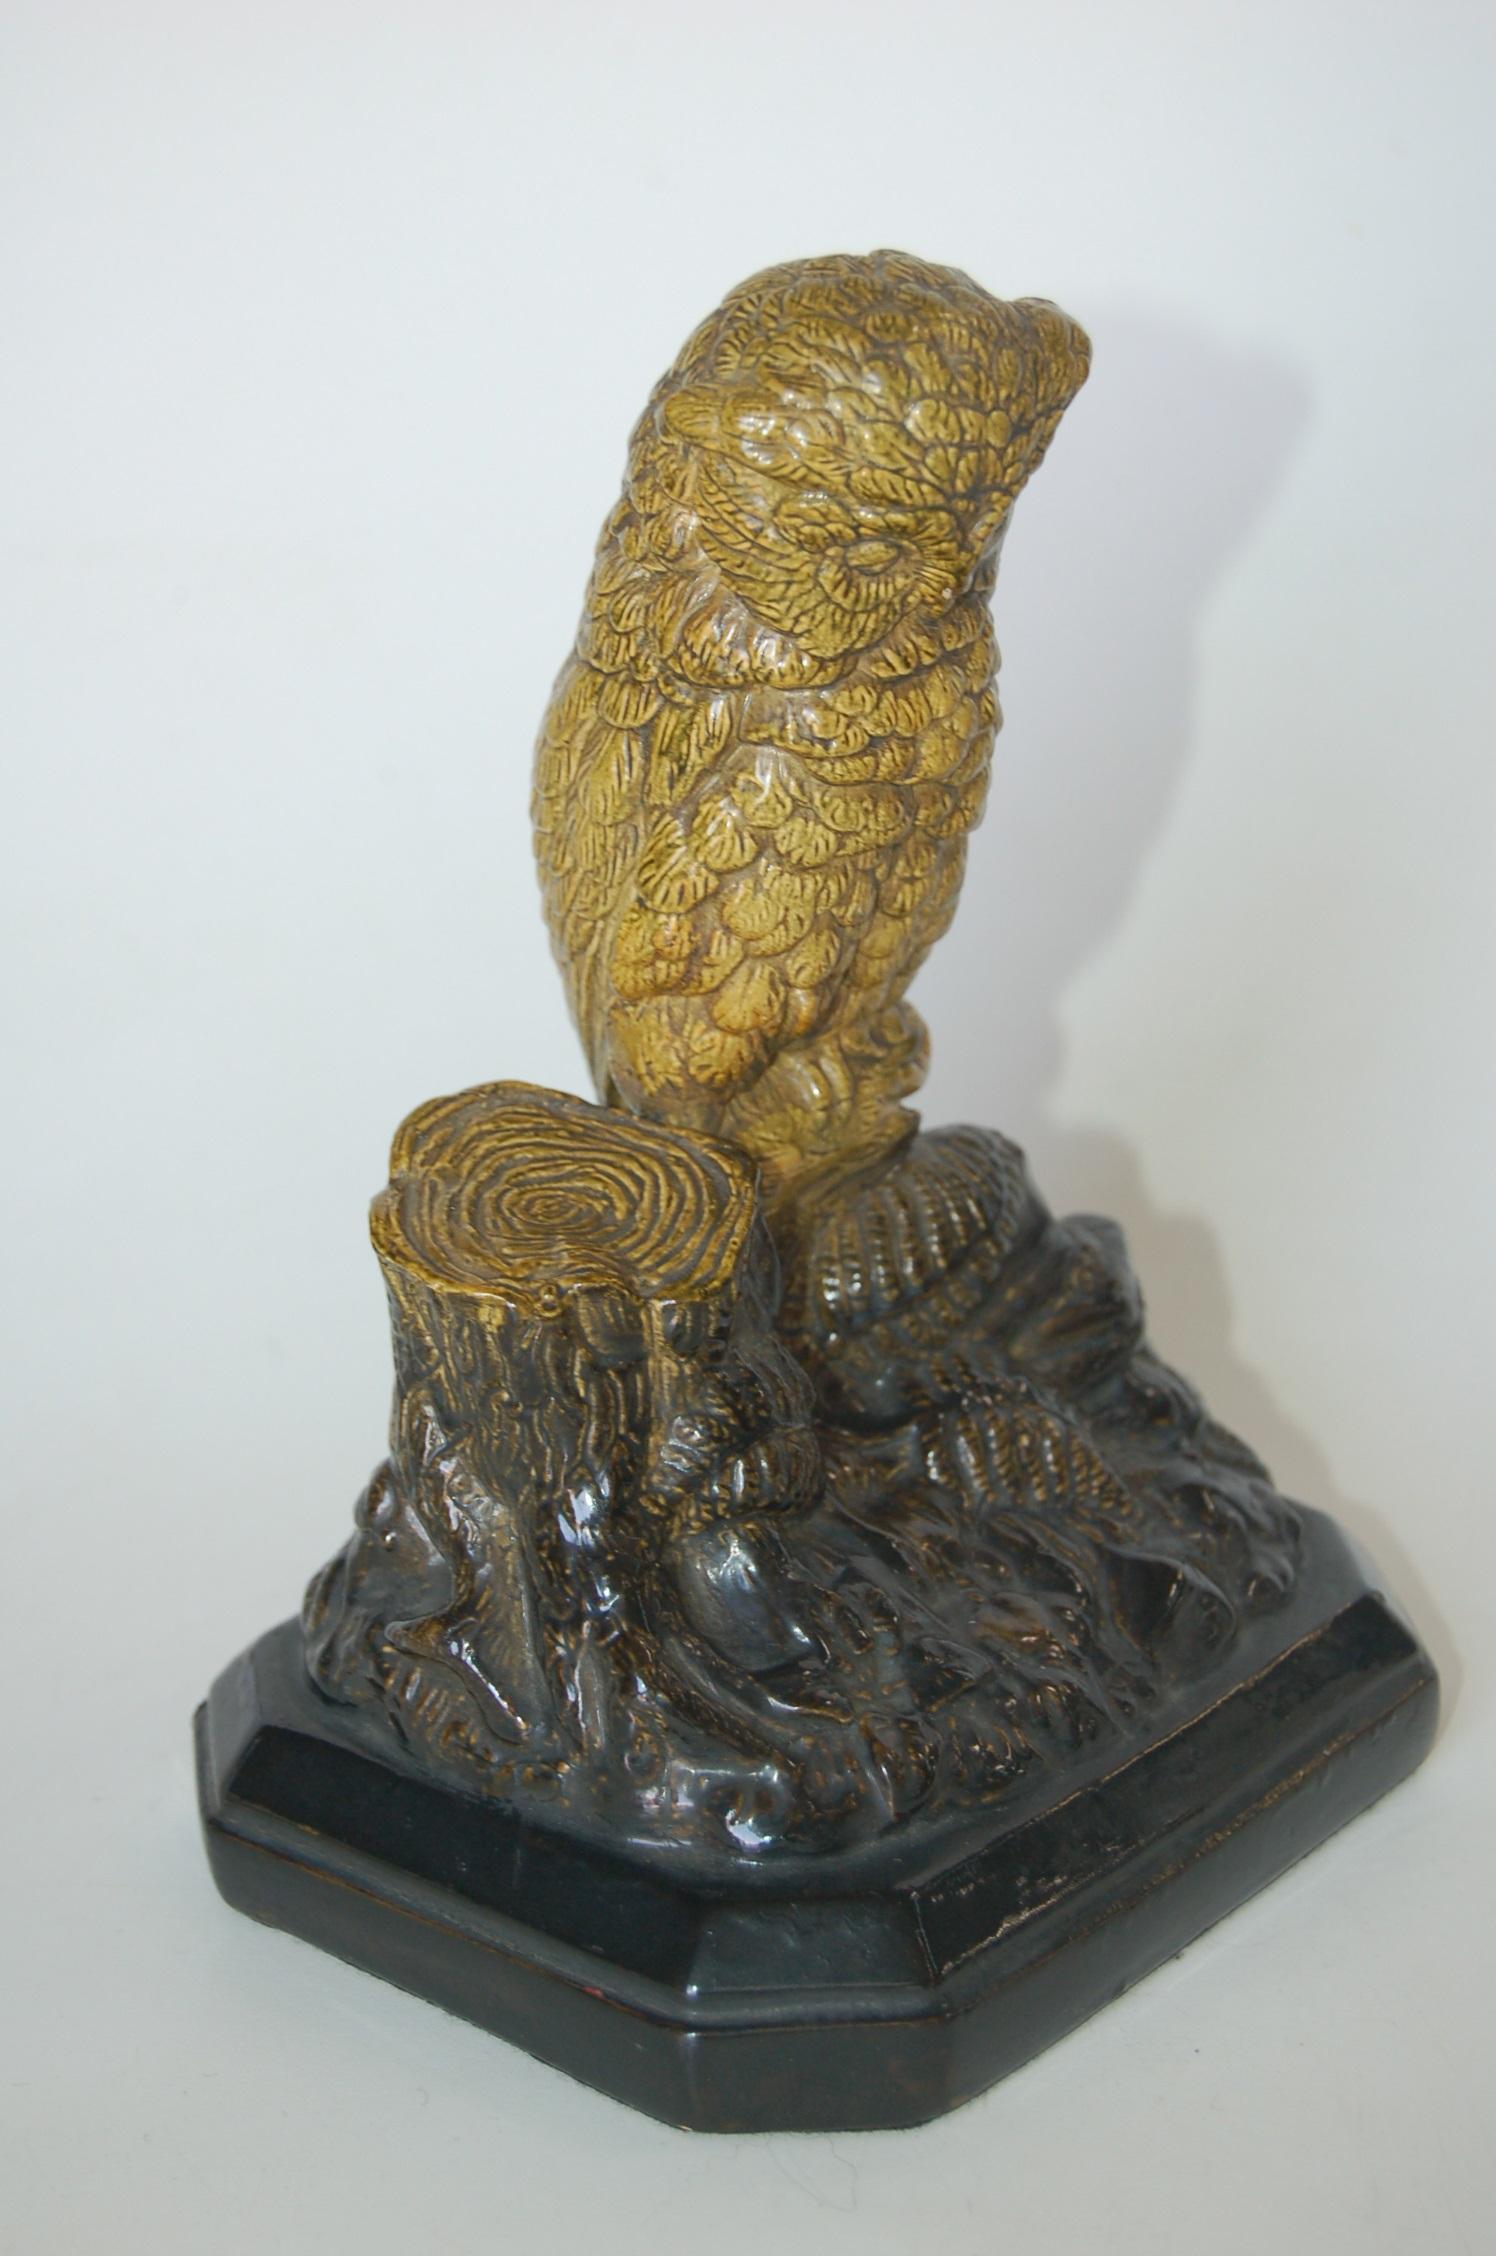 Borghese English Victorian period Majolica owl figurine. Lable and #123 underneath. 

Registry Date of November 9, 1871. 

Perched on a log on a rocky ground strewn with fern fronds. Glazed in green and black/brown. The eight-sided base is painted